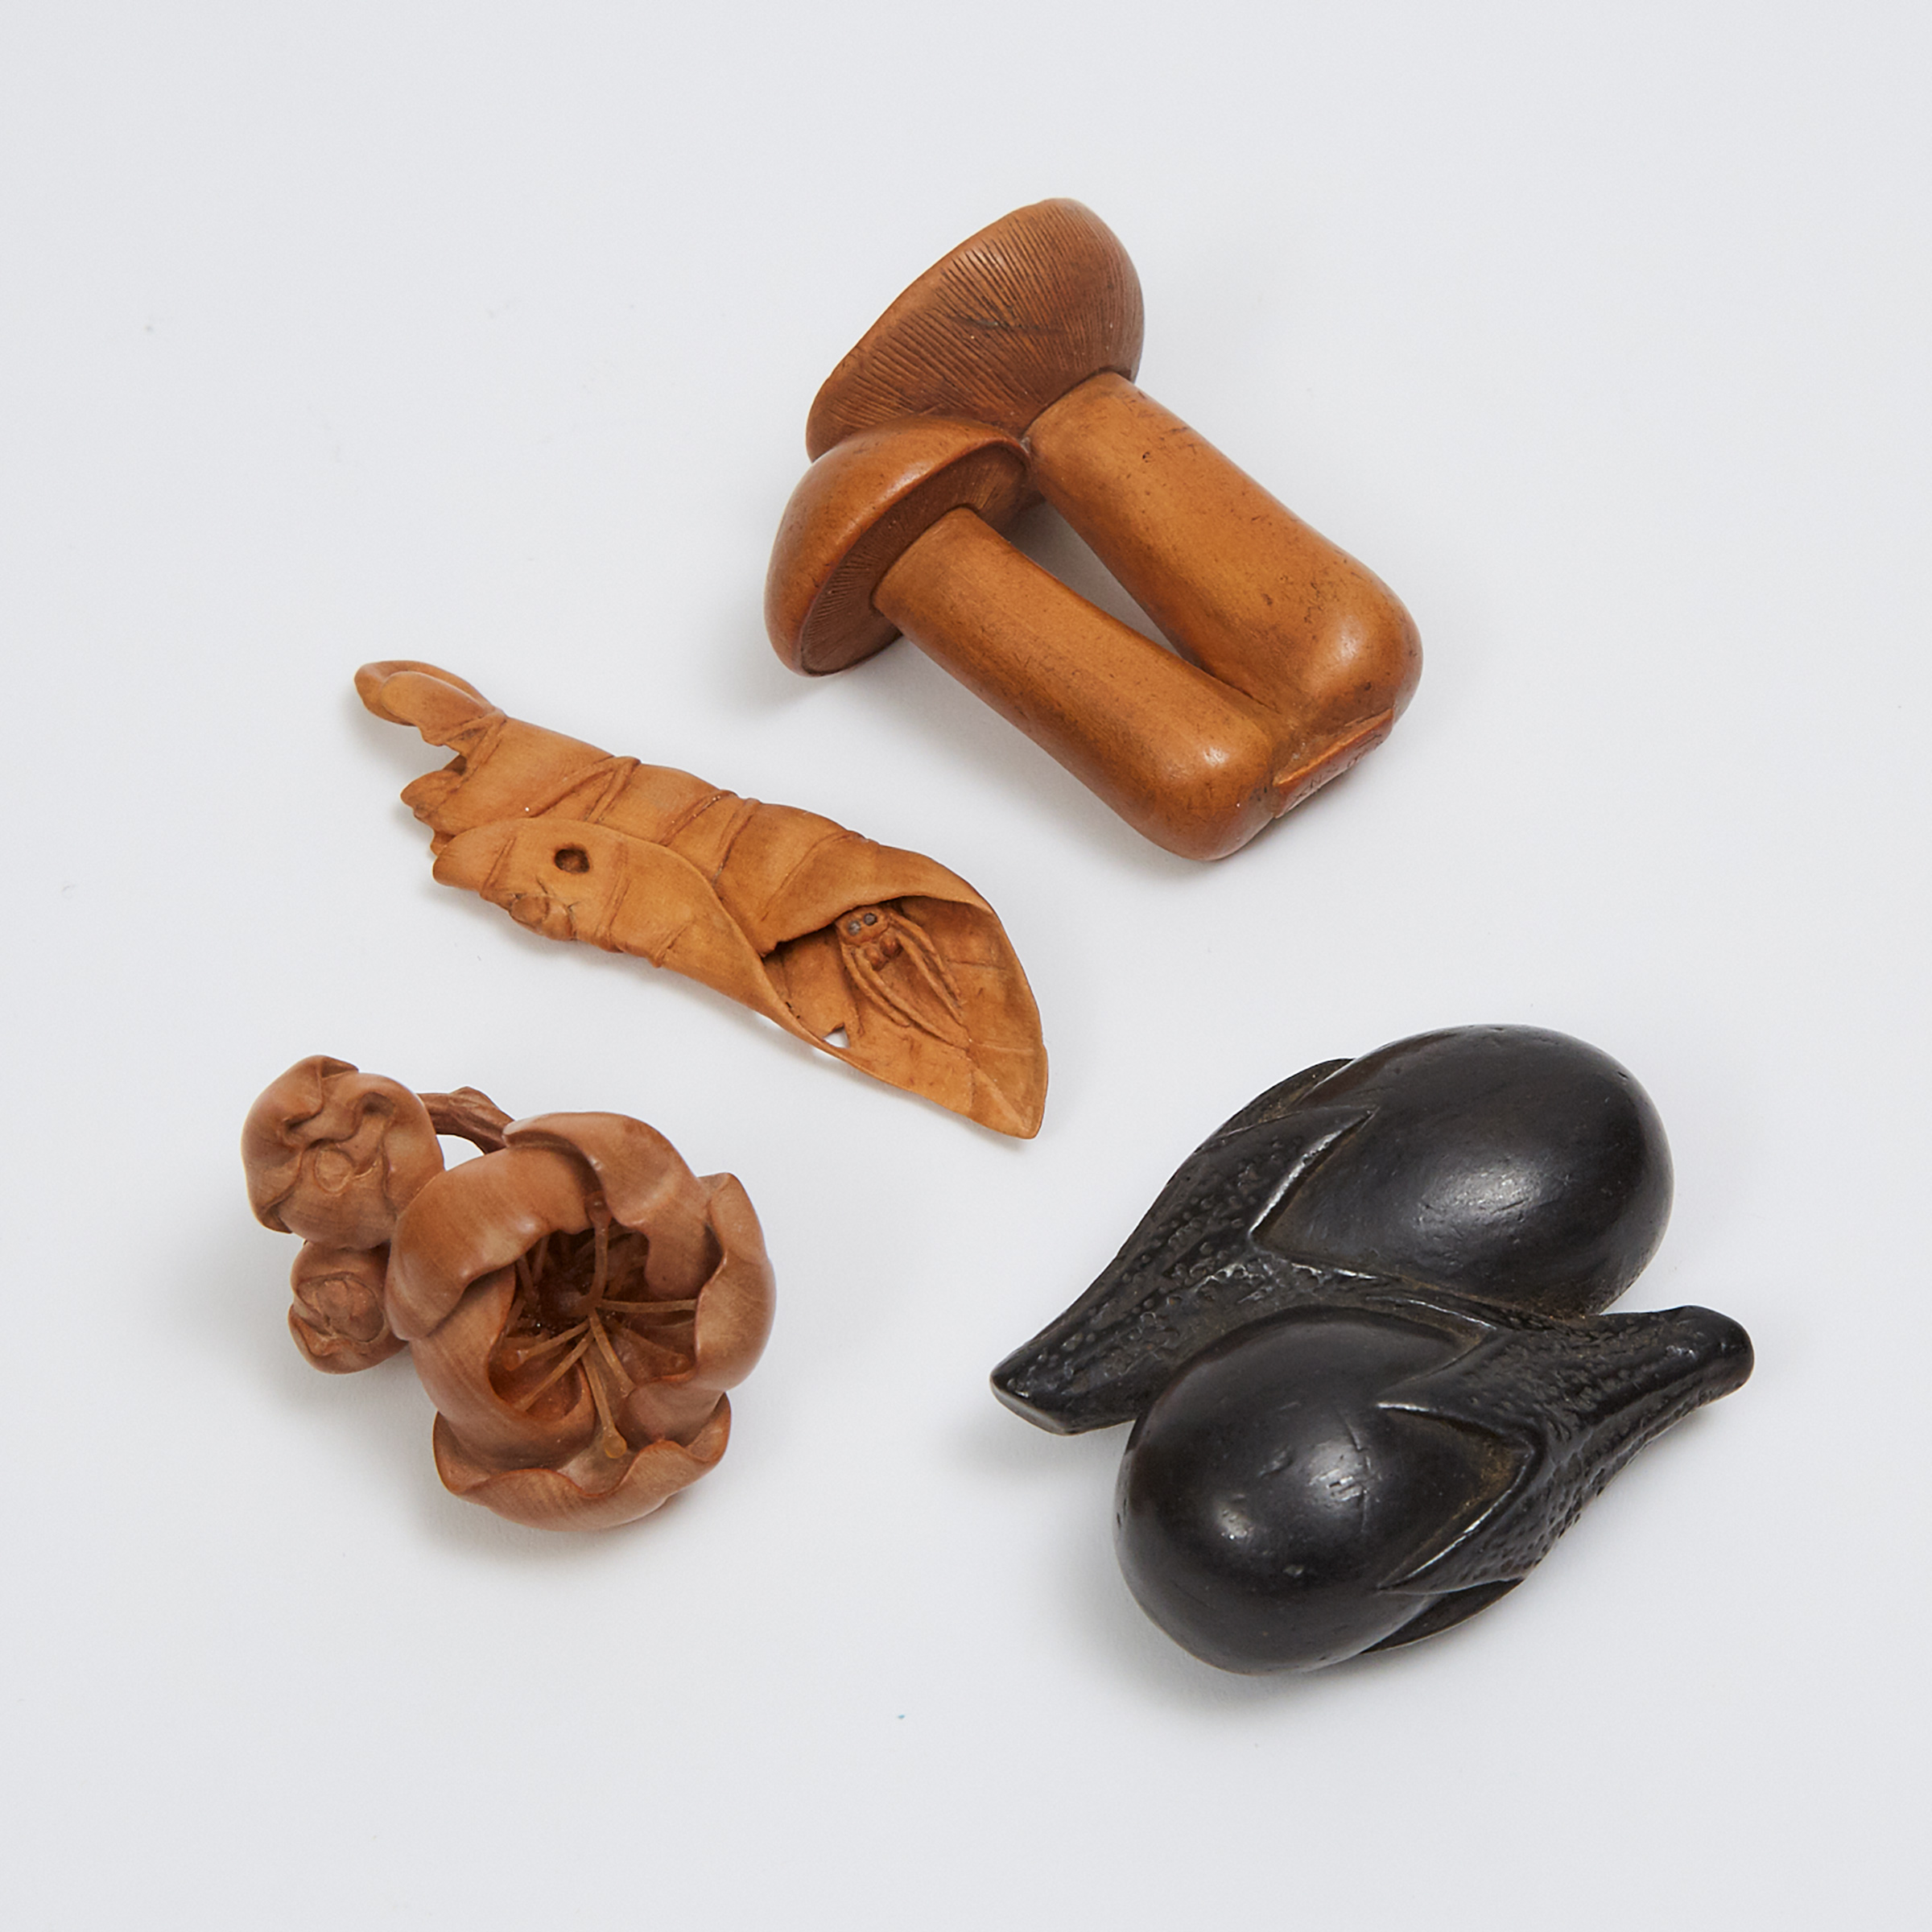 A Group of Four Boxwood and Ebony Netsuke of Vegetables, Cherry Blossoms, and a Leaf, Three Signed, 19th/20th Century